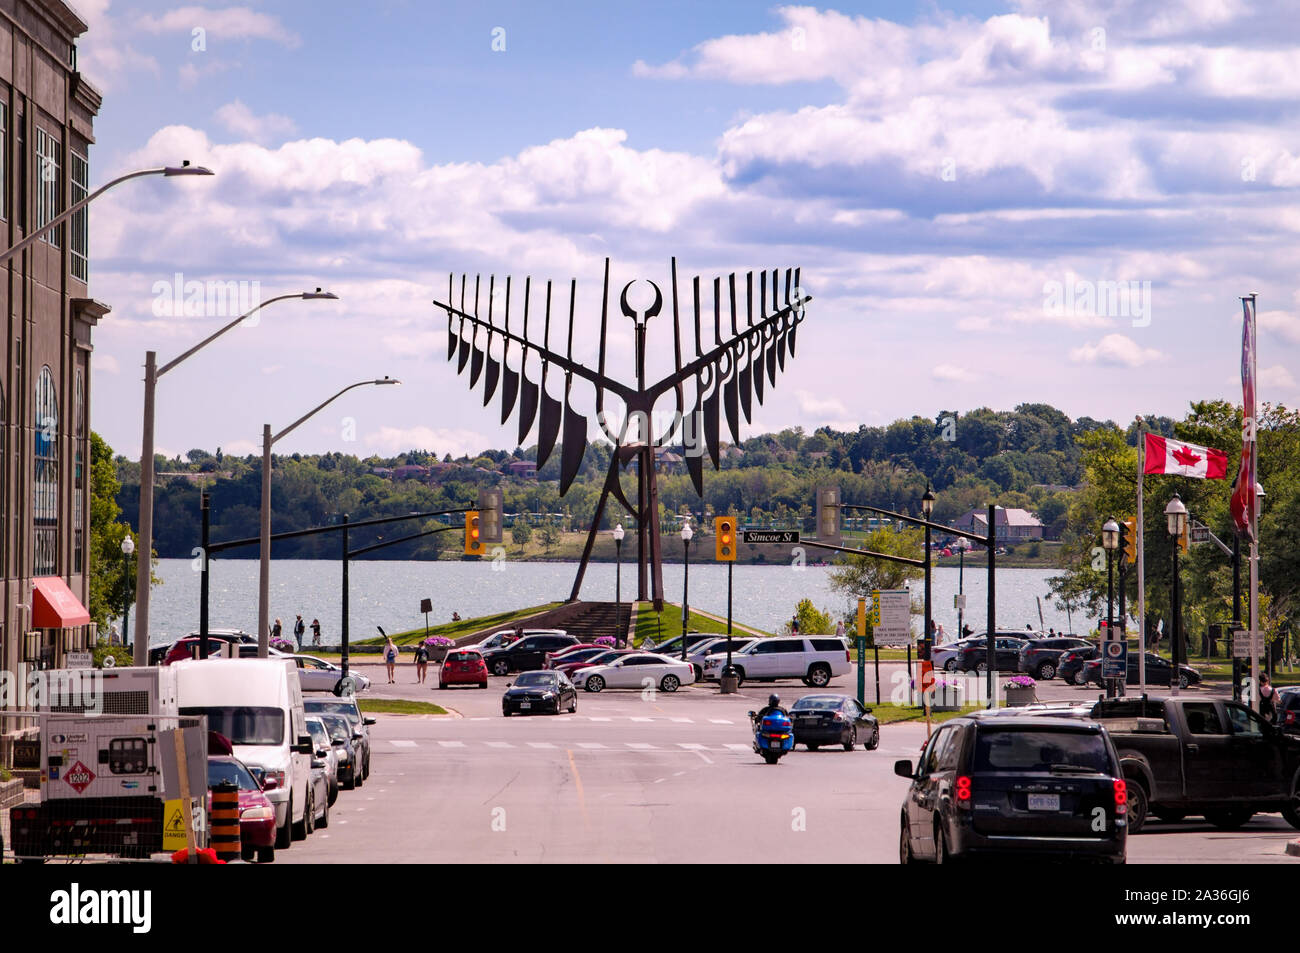 Barrie, Ontario, Canada - 2019 08 25: Summer view along the Maple ave with the Spirit Catcher sculpture in front of the lake Simcoe. Spirit Catcher is Stock Photo